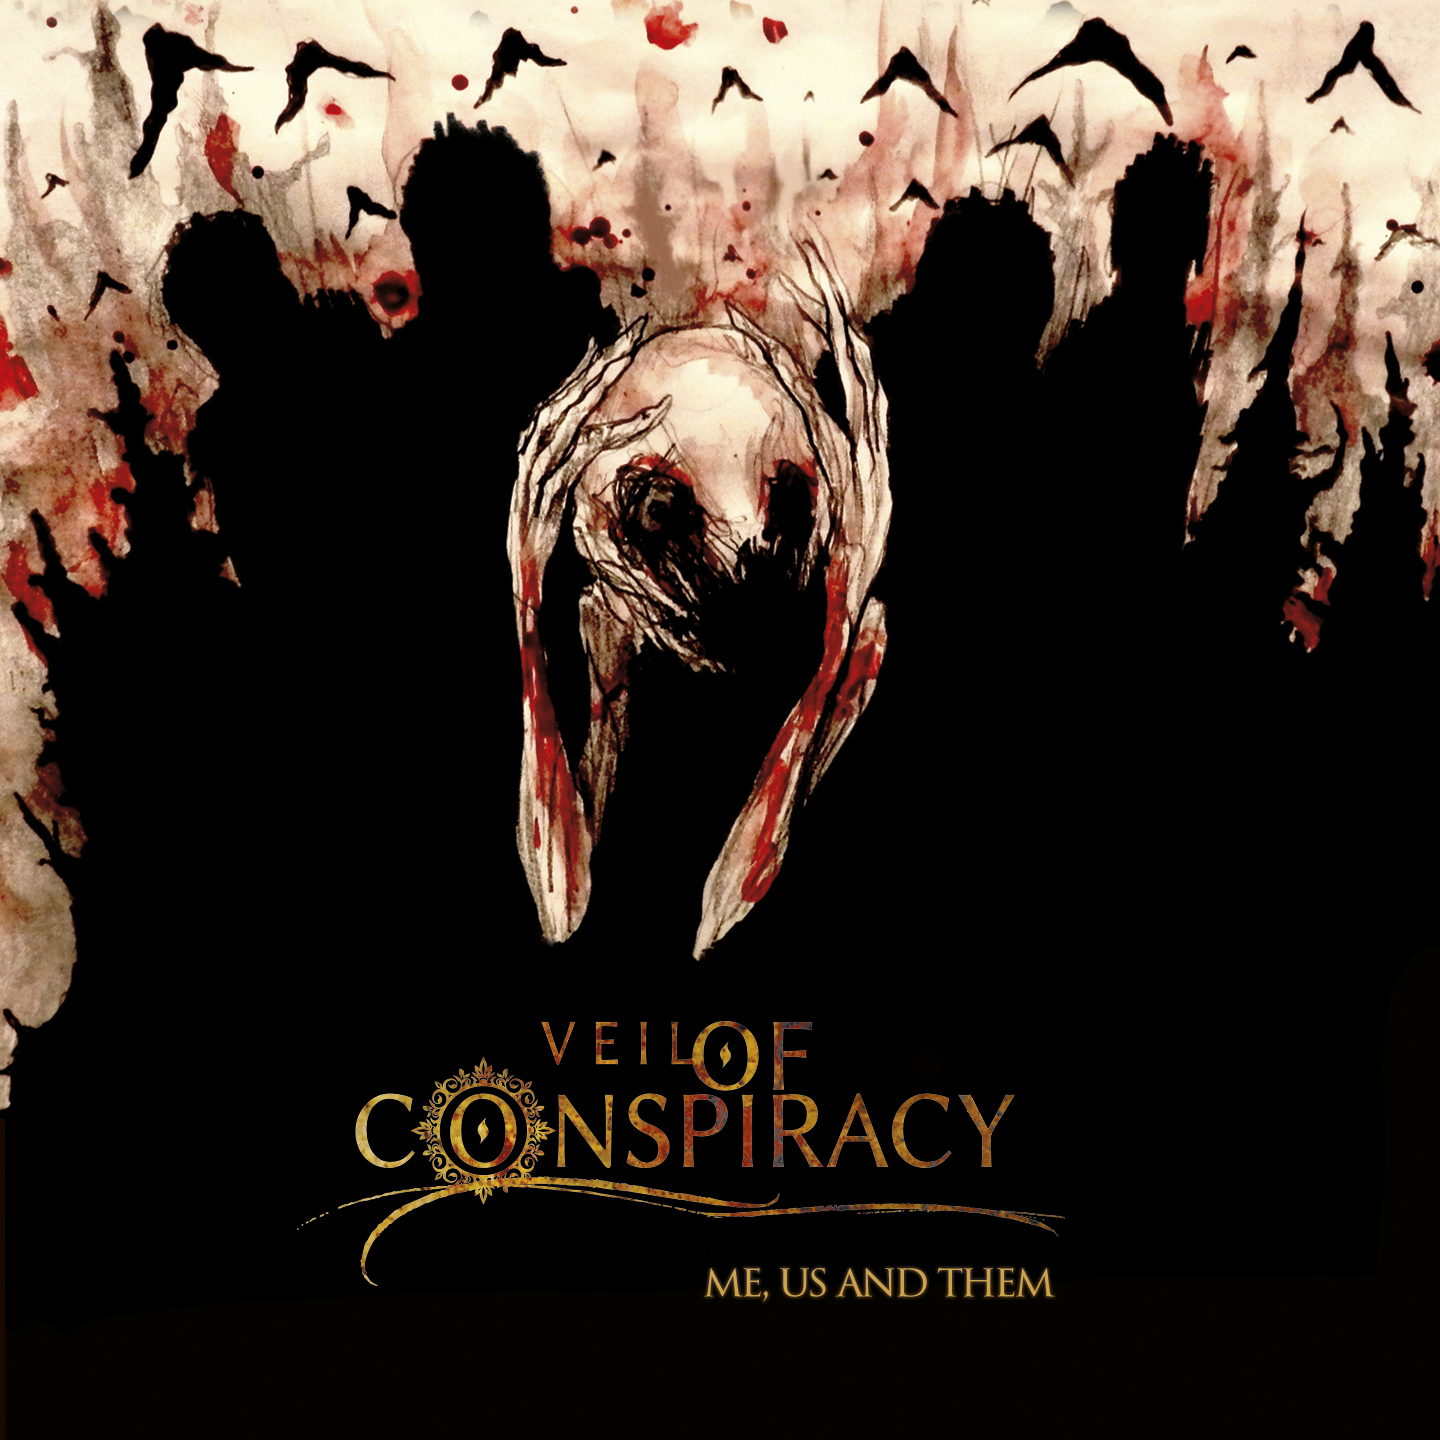 veil-of-conspiracy-me-us-and-them-die-duestere-seite-des-lebens-cd-review